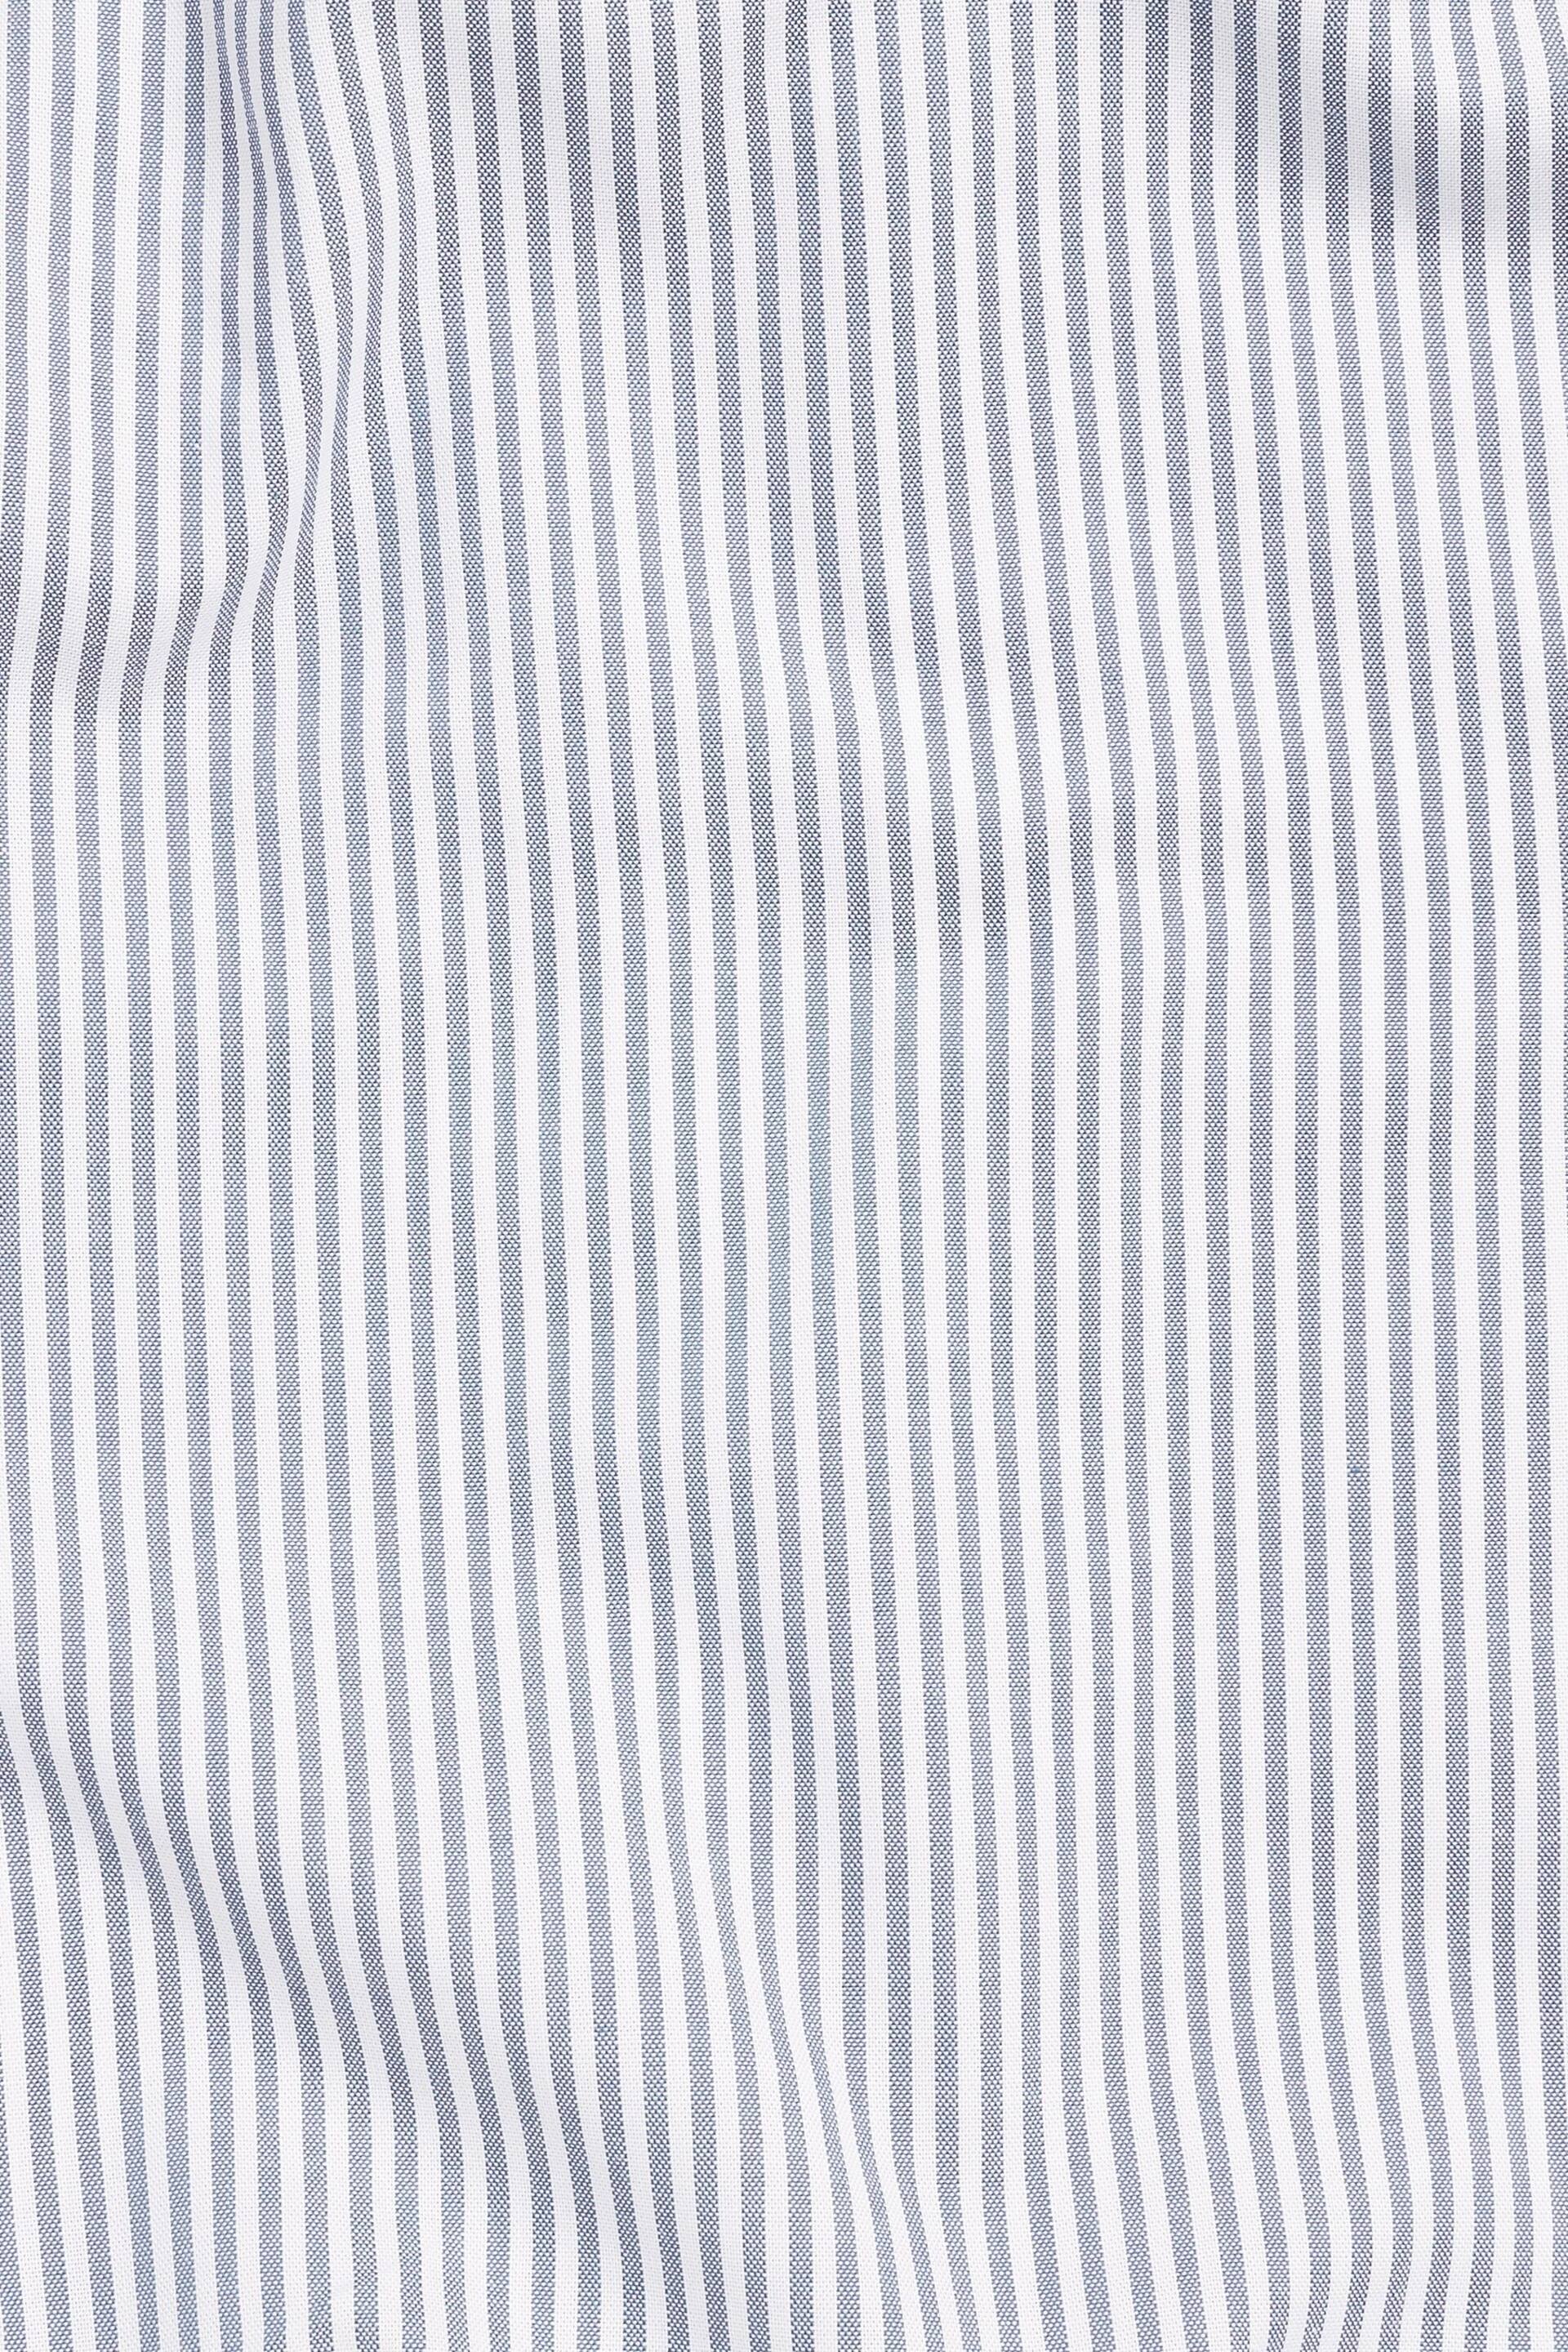 White/Blue Stripe Regular Fit Easy Iron Button Down Oxford Shirt - Image 3 of 9